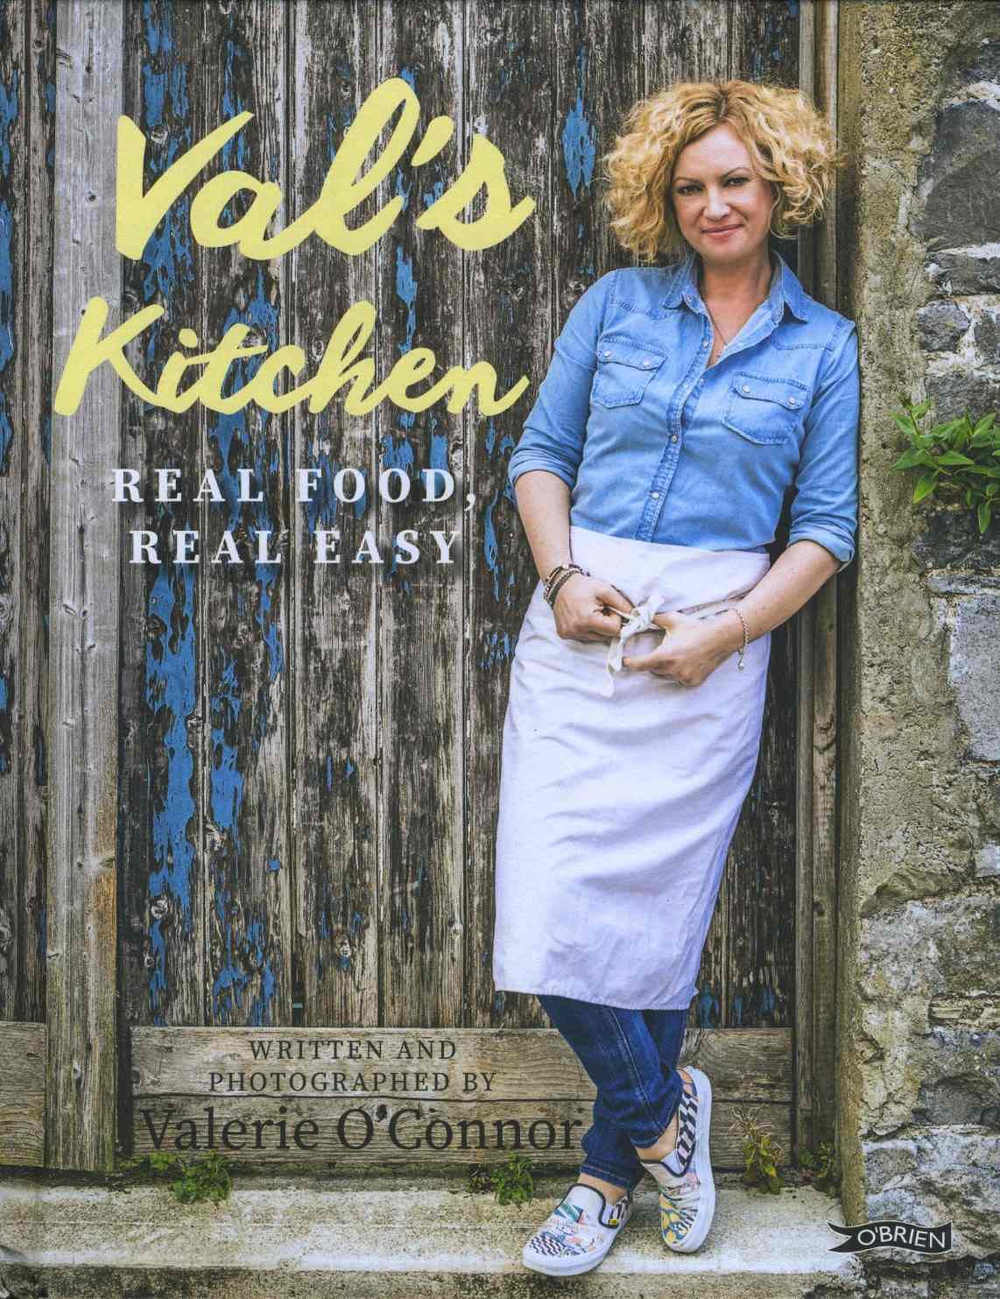 Val's Kitchen Real Food, Real Easy by Valerie O'Connor (Brien Press; hardback, 246x189mm, 160pp; photography by the author; â‚¬19.99/Â£14.99)